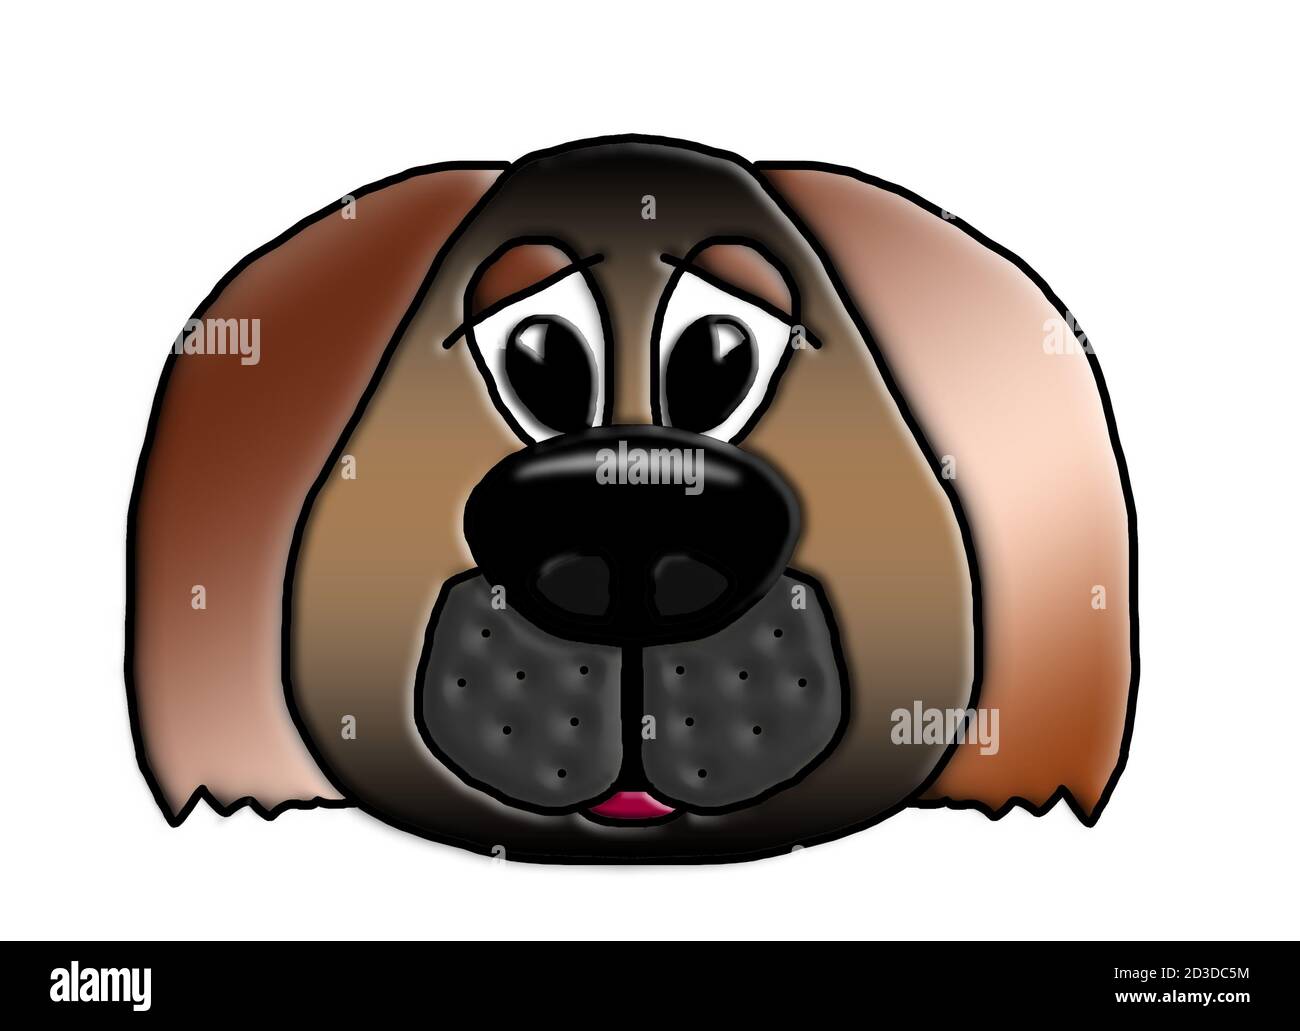 Dog face digital image with plain background cartoon style artwork textured and highlighted facial features. Large shiny nose floppy ears sleepy eyes Stock Photo